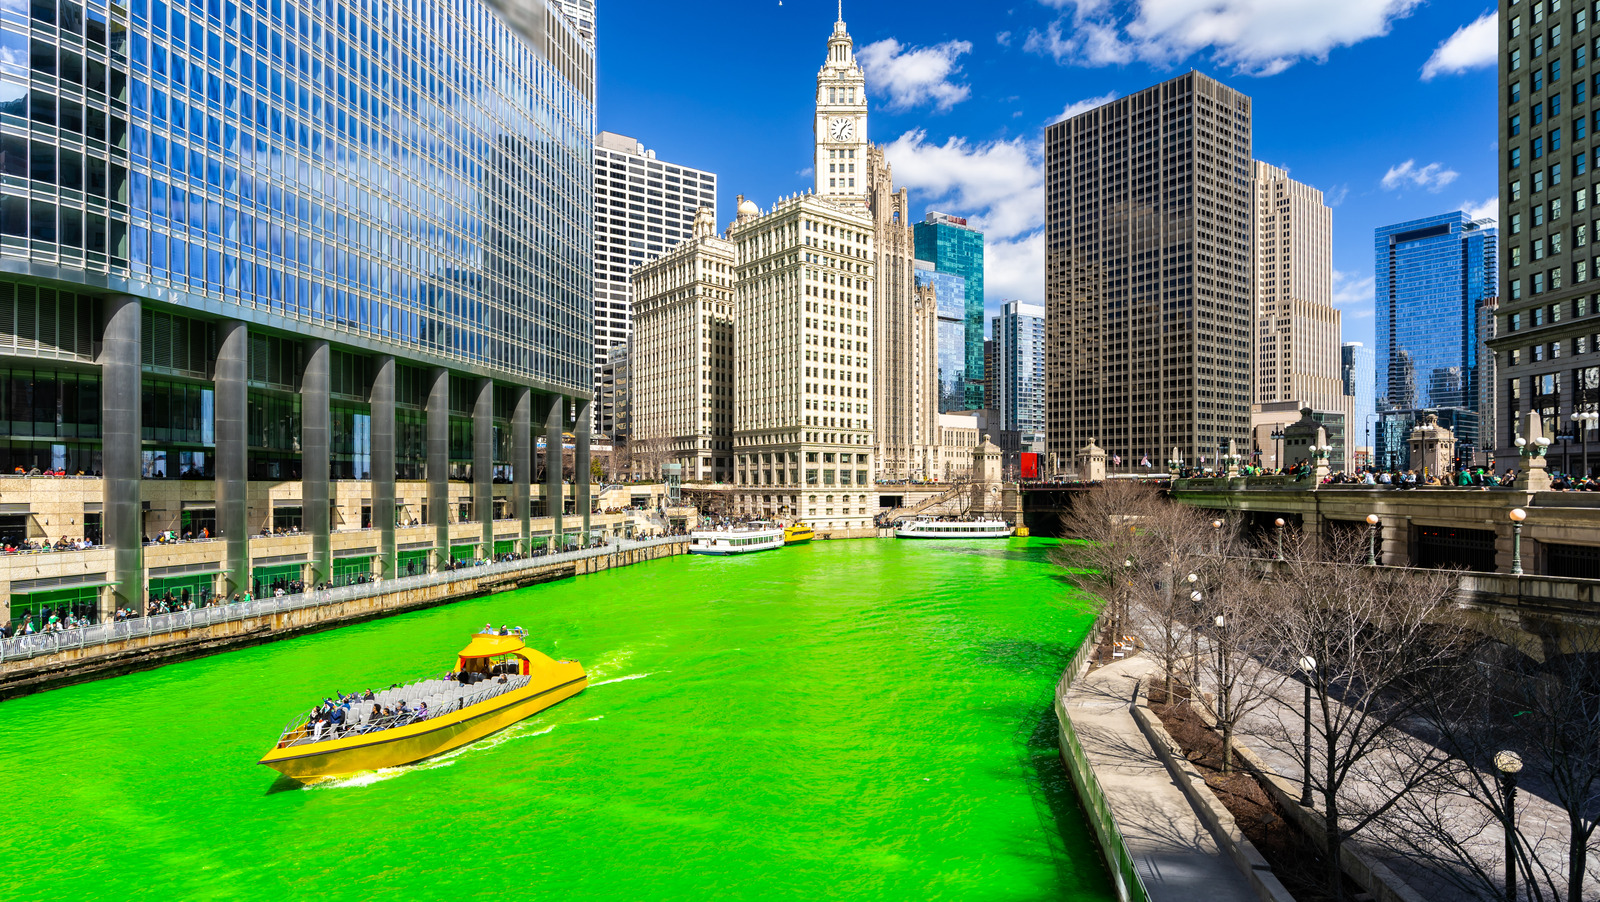 How The Annual Dyeing Of The Chicago River Became A St Patricks Day Tradition 3512